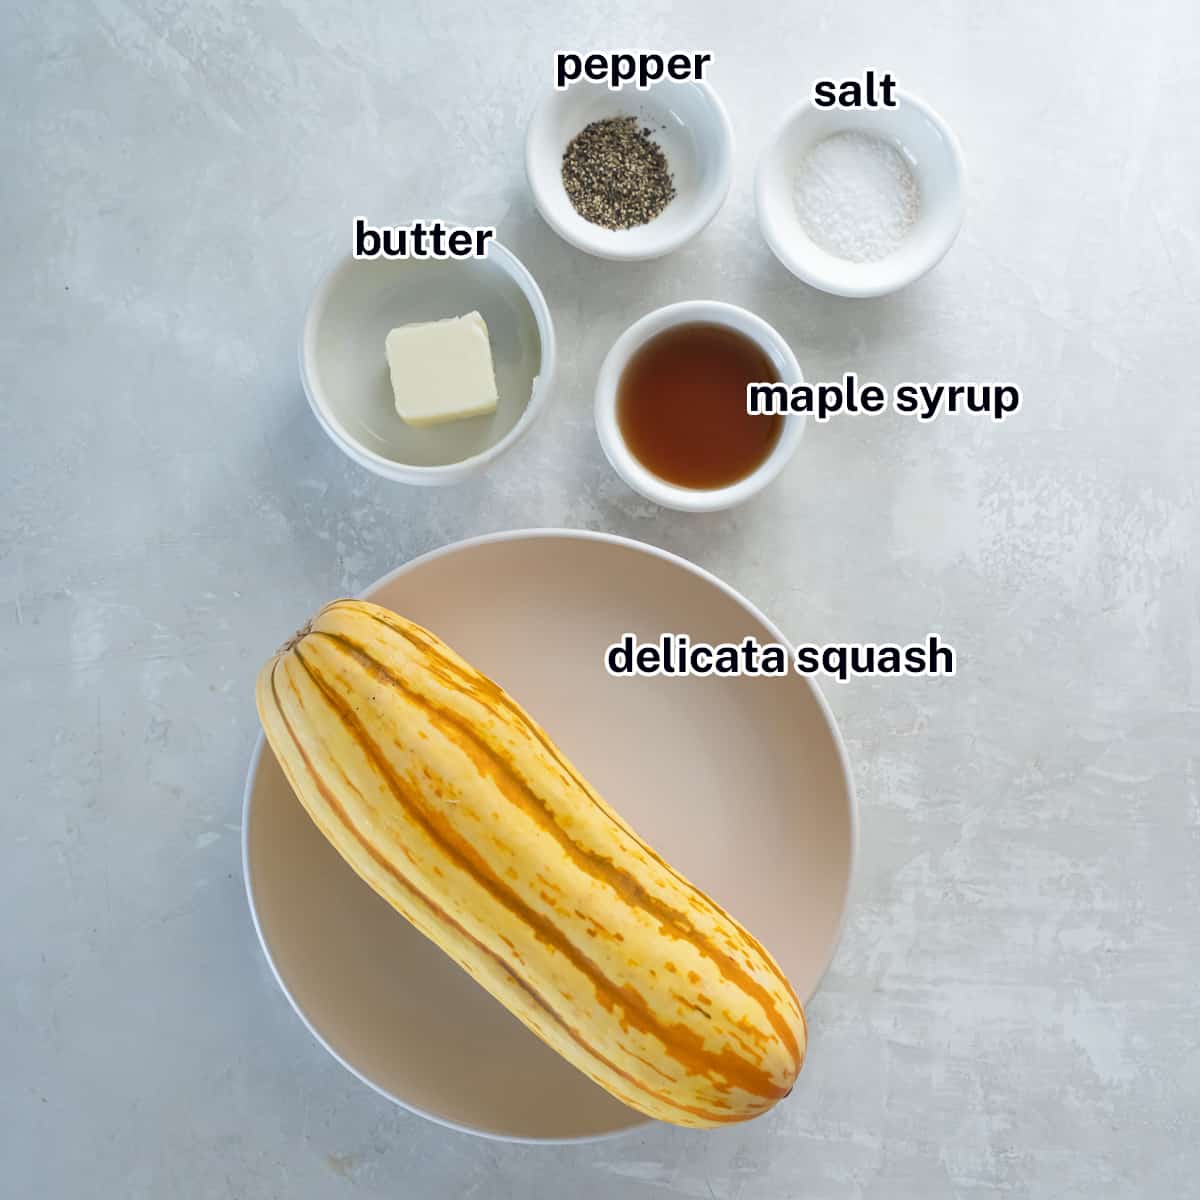 A delicata squash on a plate next to small bowls filled with butter, maple syrup, salt and pepper with text.